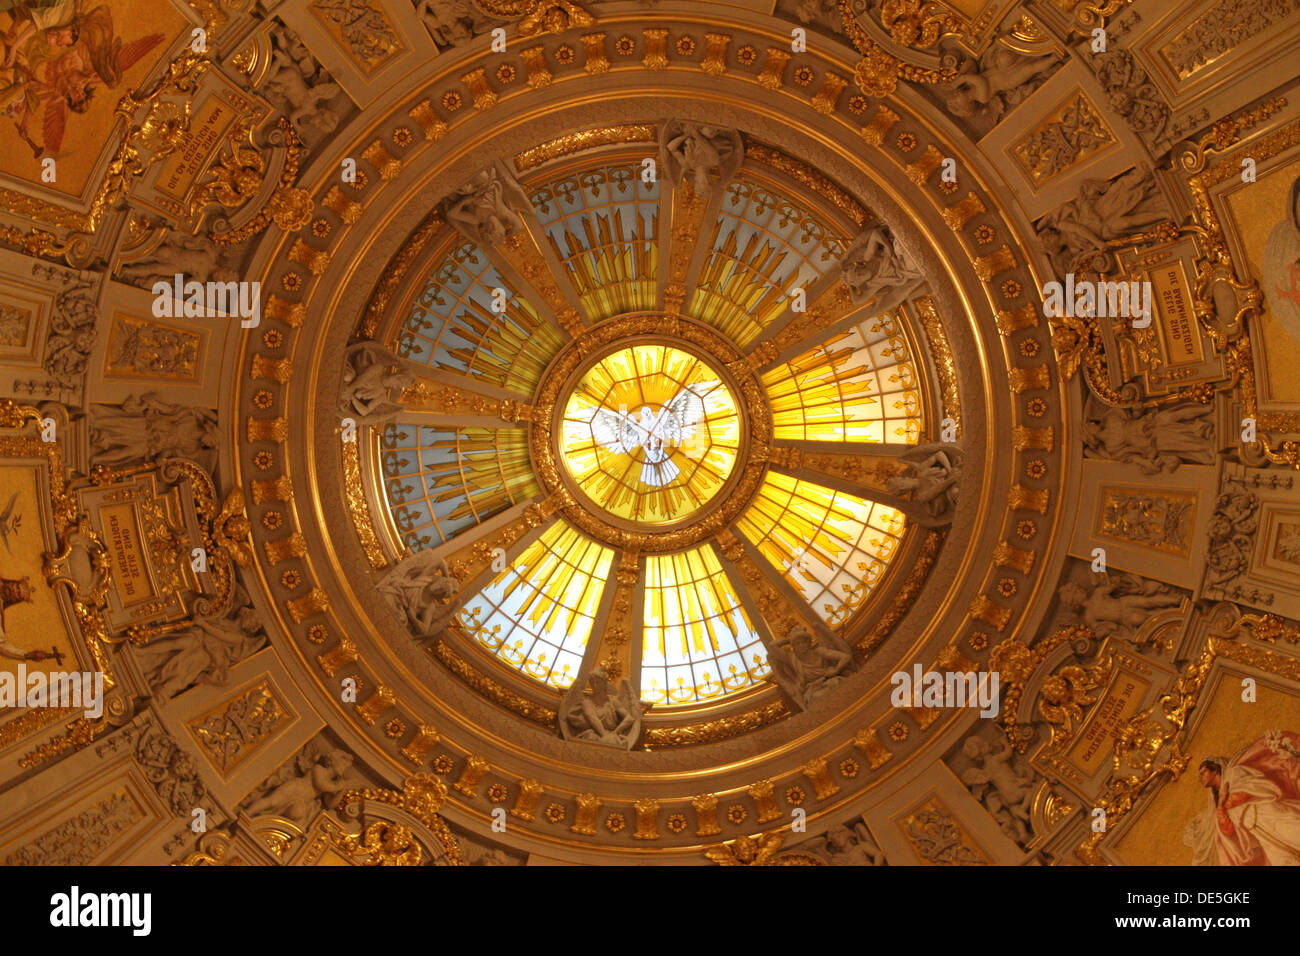 Germany: Inside view of Berlin Cathedral dome Stock Photo